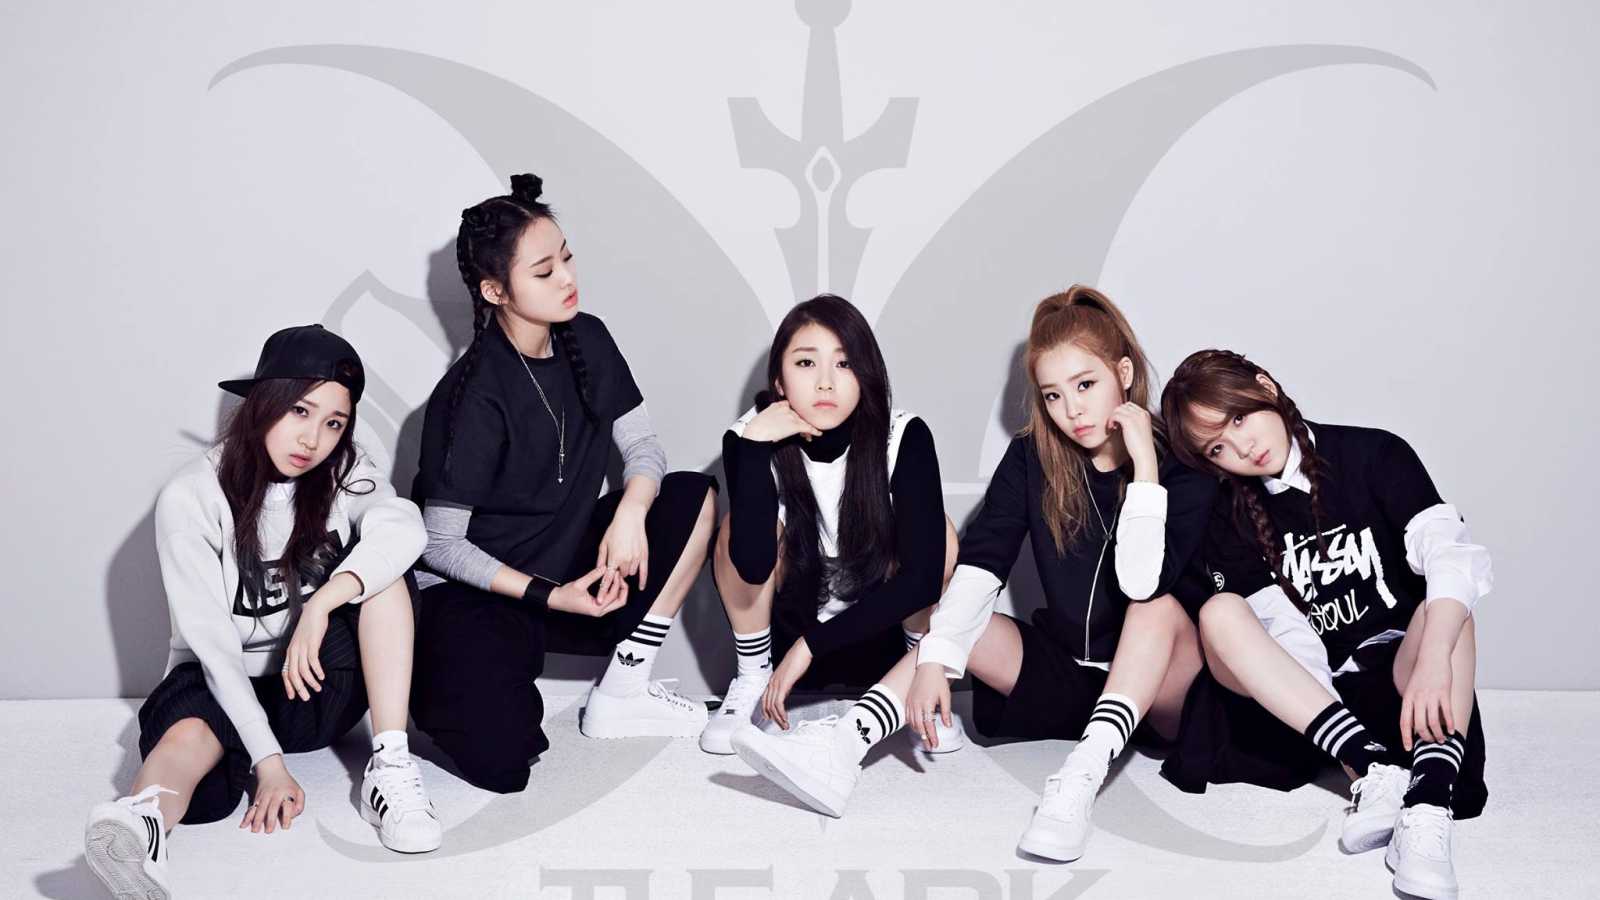 THE ARK © Music K Entertainment. All rights reserved